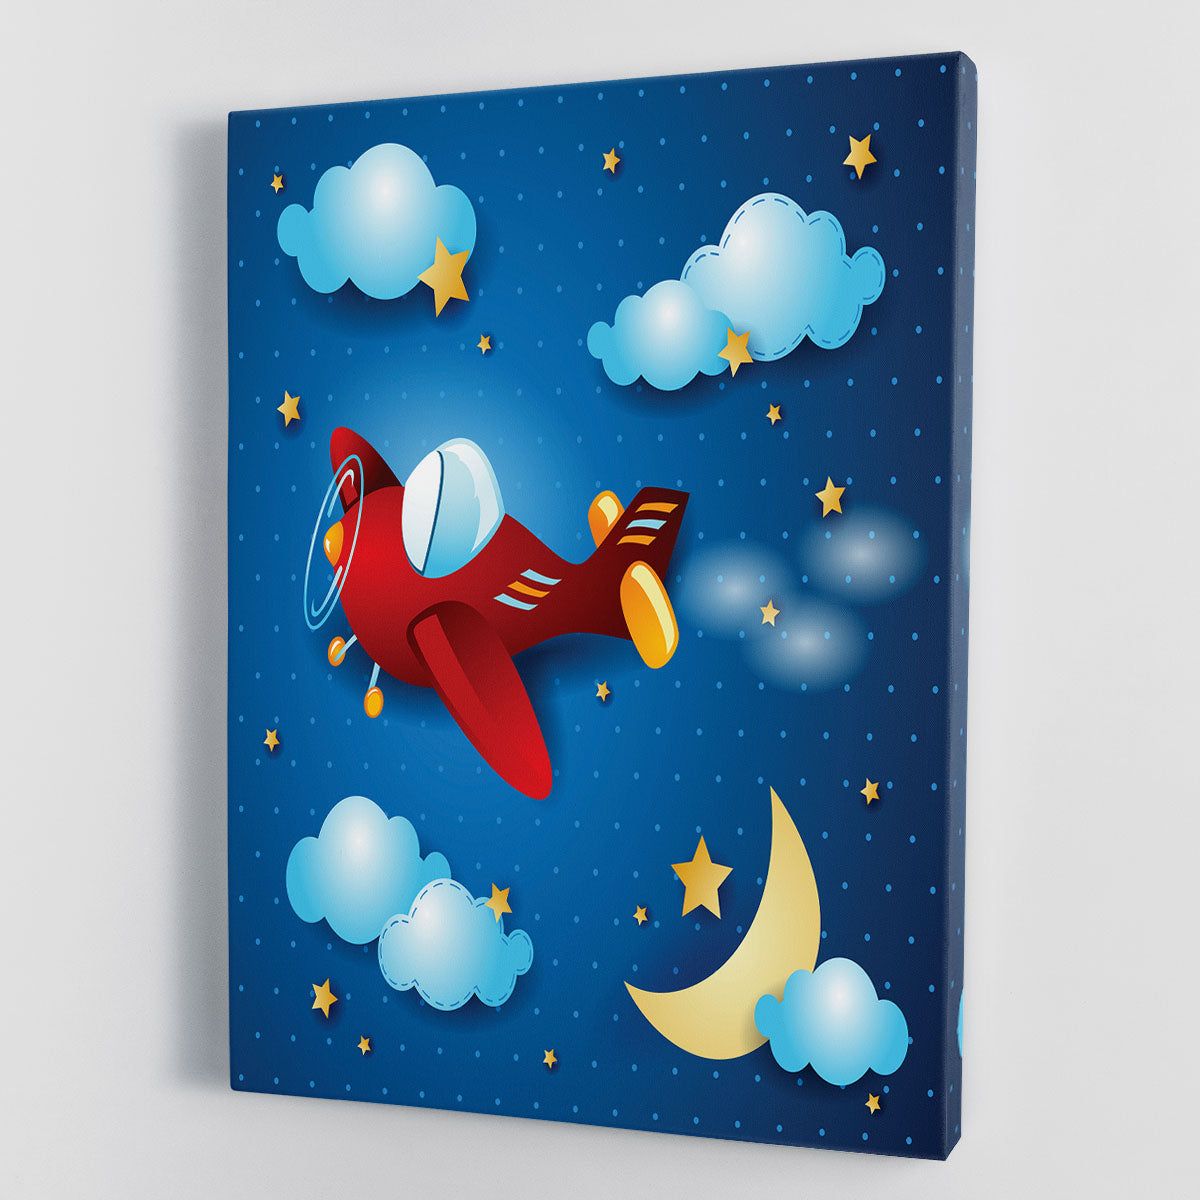 Retro airplane by night Canvas Print or Poster - Canvas Art Rocks - 1